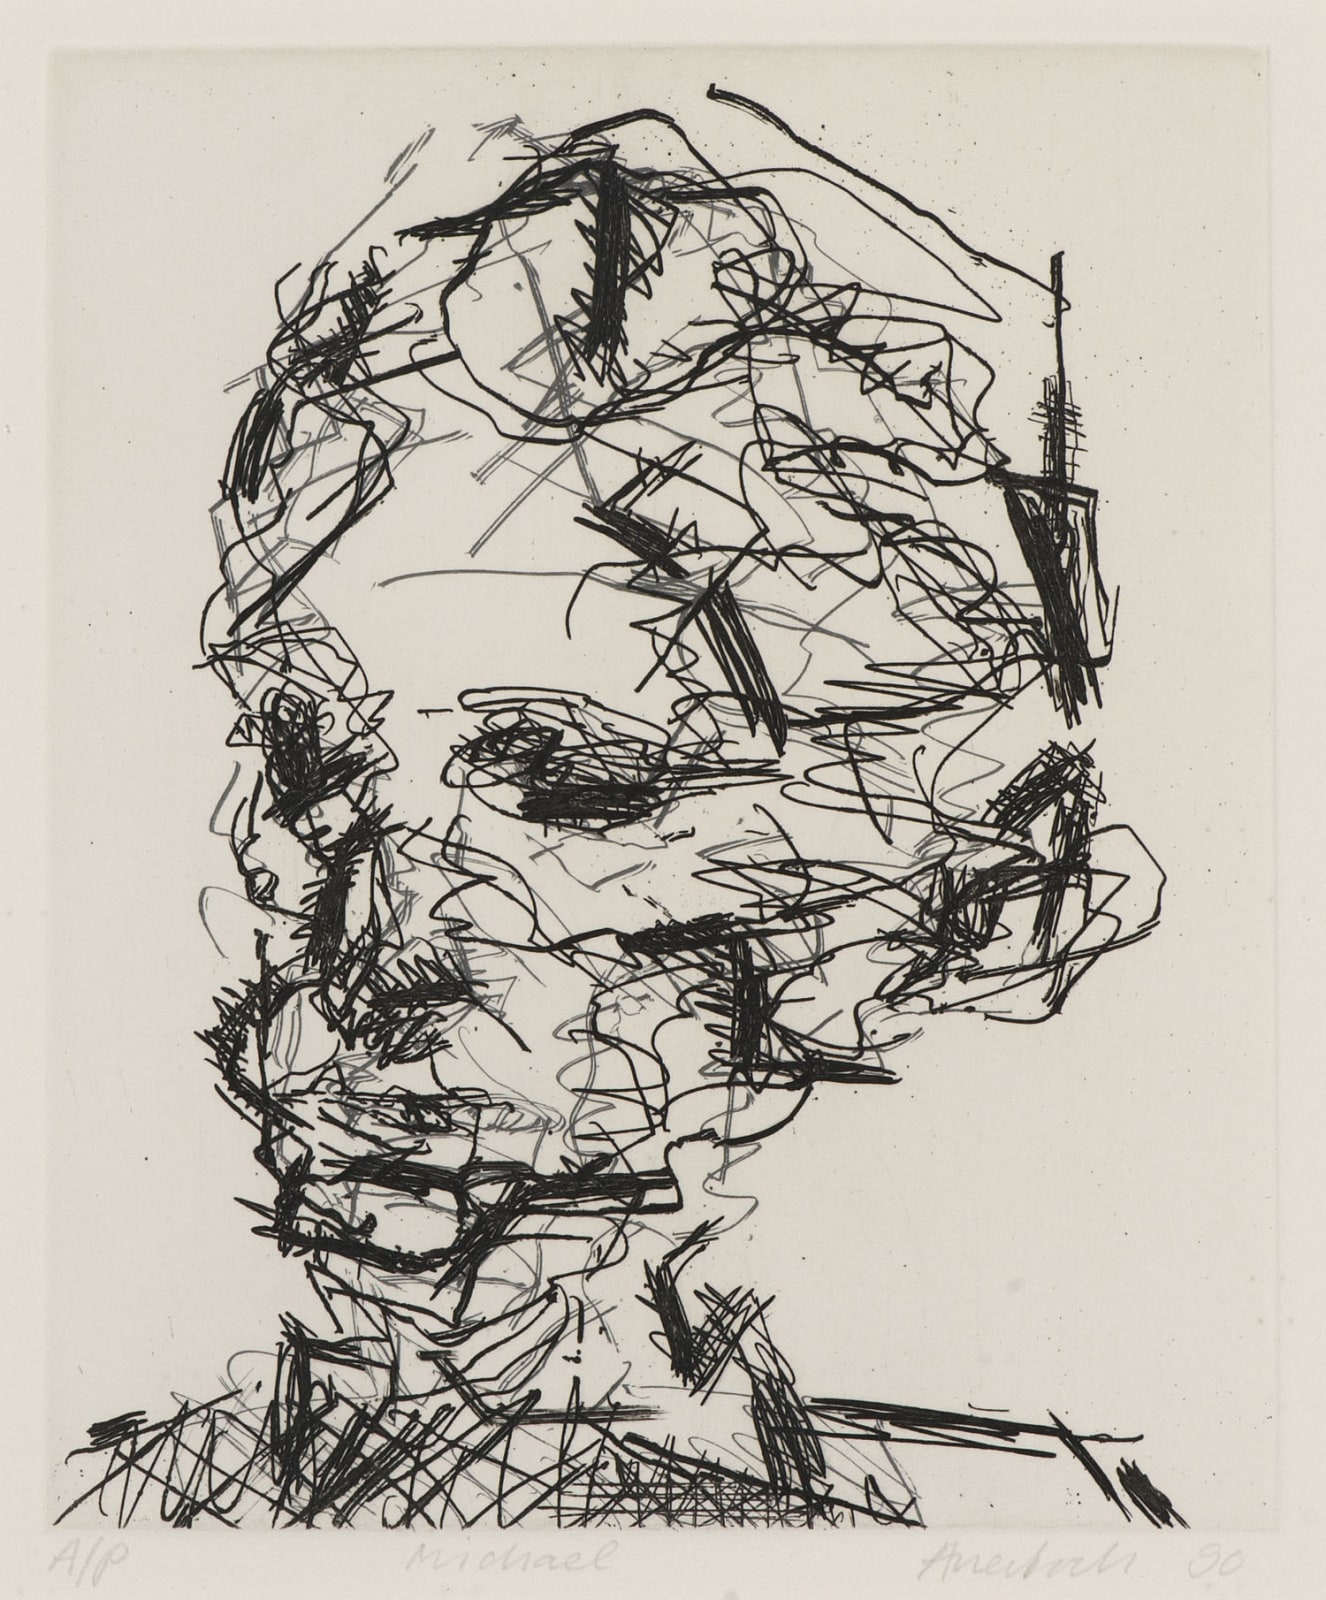 Frank Auerbach (1931-) Michael, Series: Part of Seven Portraits 1990 Etching, printed on Somerset white paper, artist's proof outside the published edition of 50 20 x 16.5 cm Ben Uri Collection © Frank Auerbach, courtesy Marlborough Fine Art